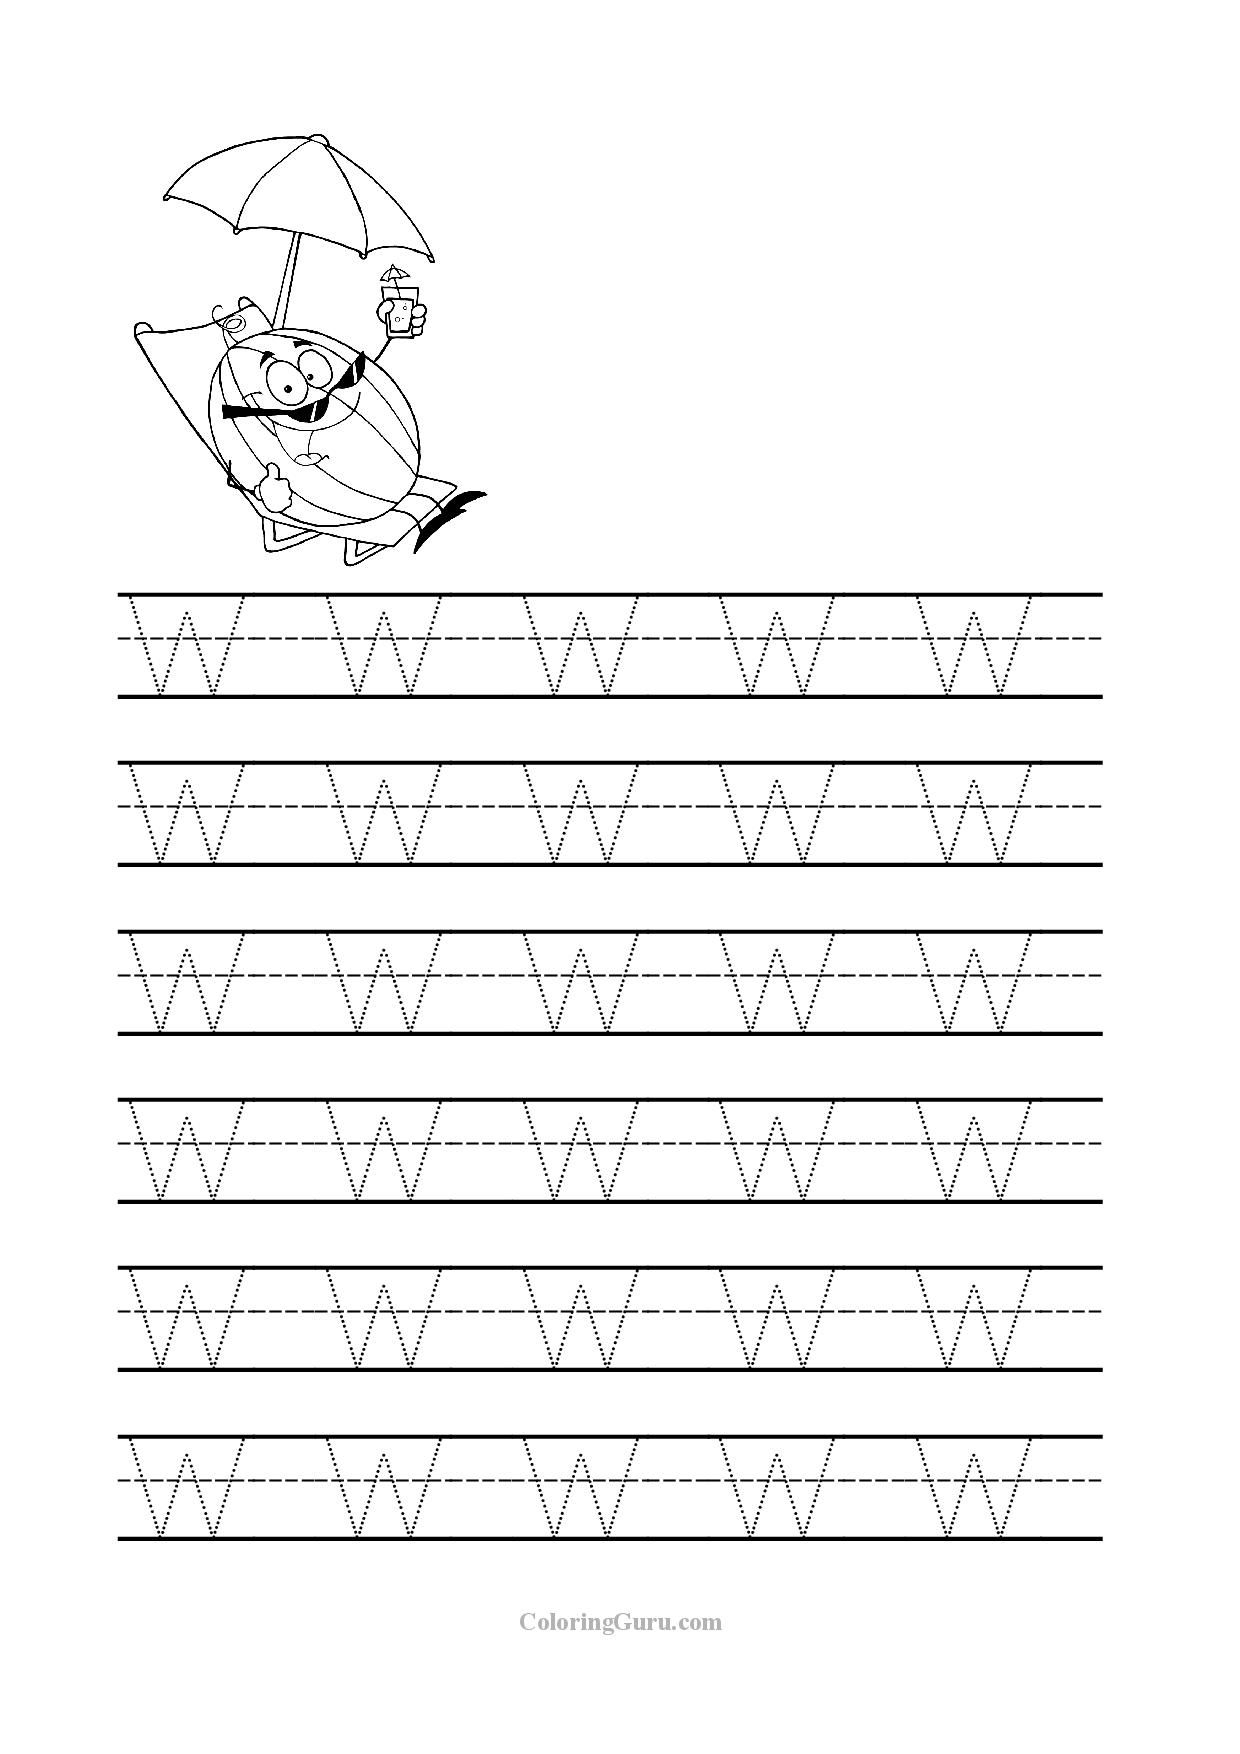 Free Printable Tracing Letter W Worksheets For Preschool in Tracing Letter W Worksheets